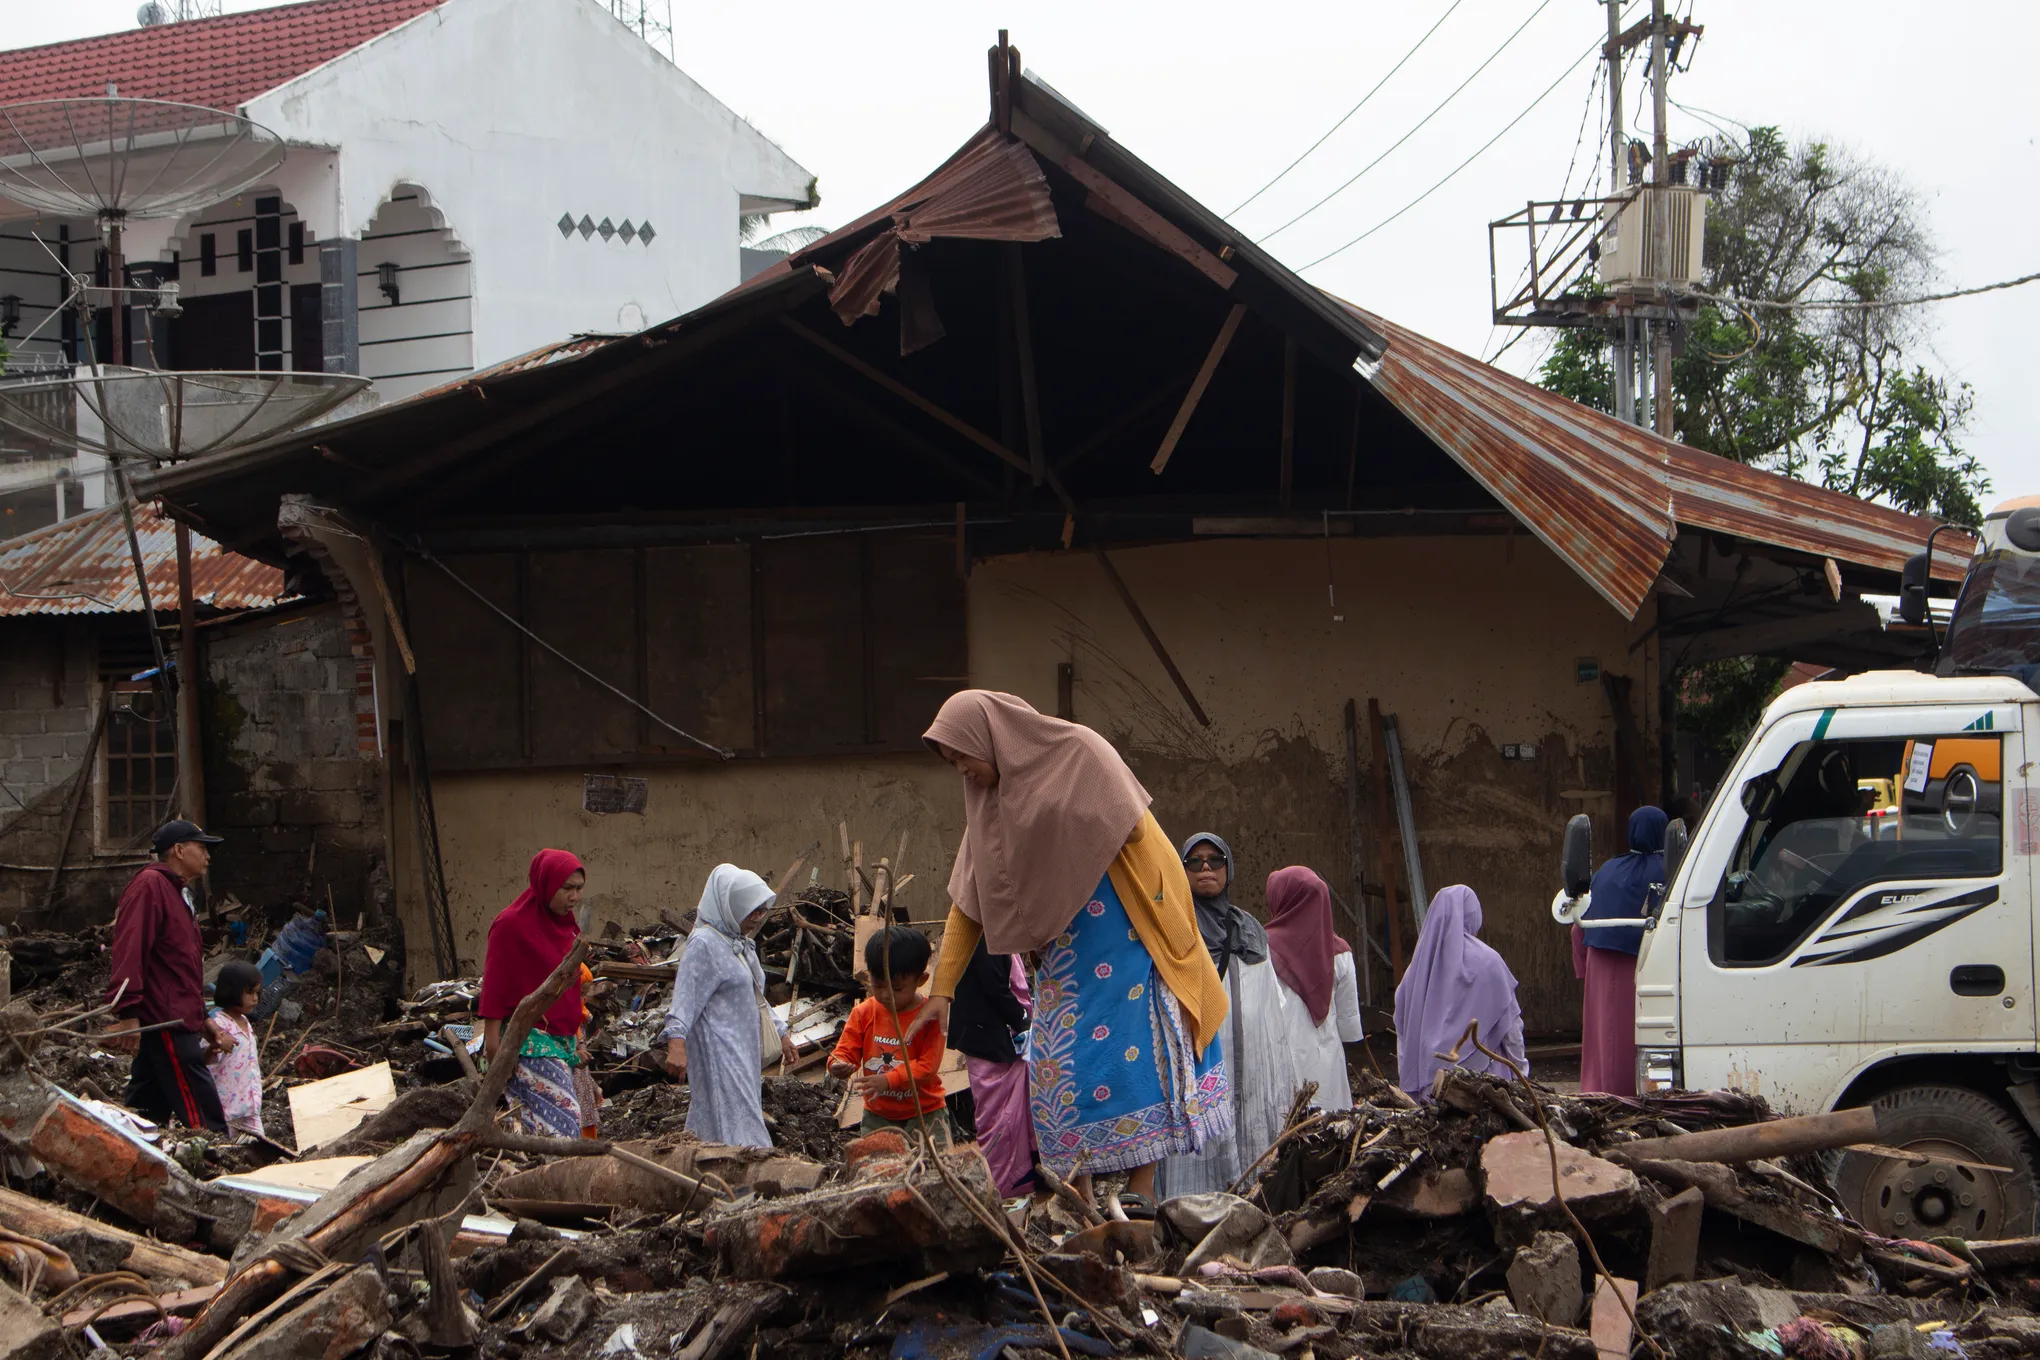 Indonesia seeds clouds to block rainfall after floods killed at least 58 people while 35 are missing 